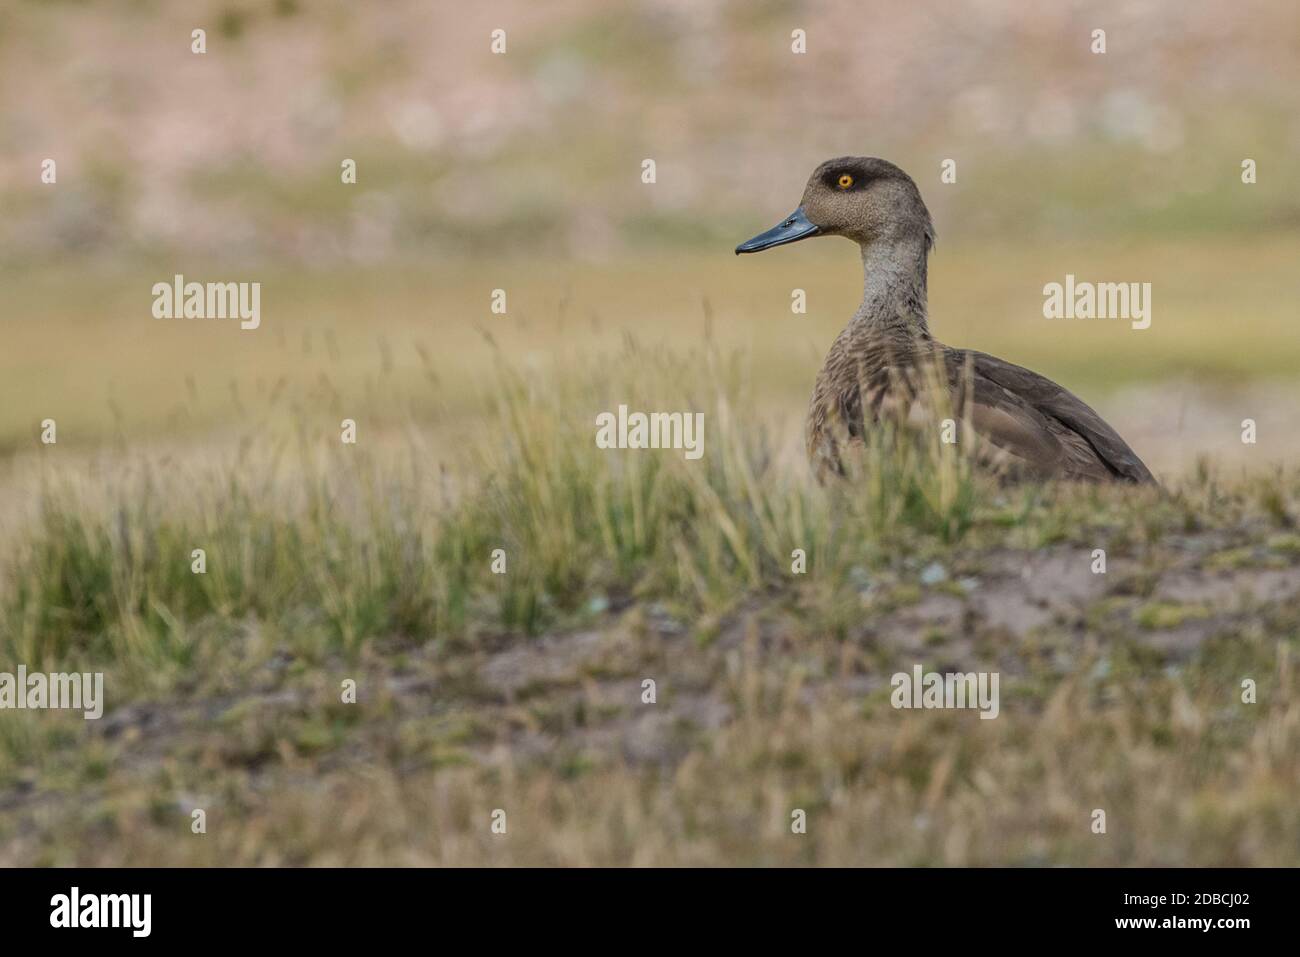 Andean crested duck (Lophonetta specularioides alticola) in the high altitude Puna habitat of the Peruvian Andes. Stock Photo